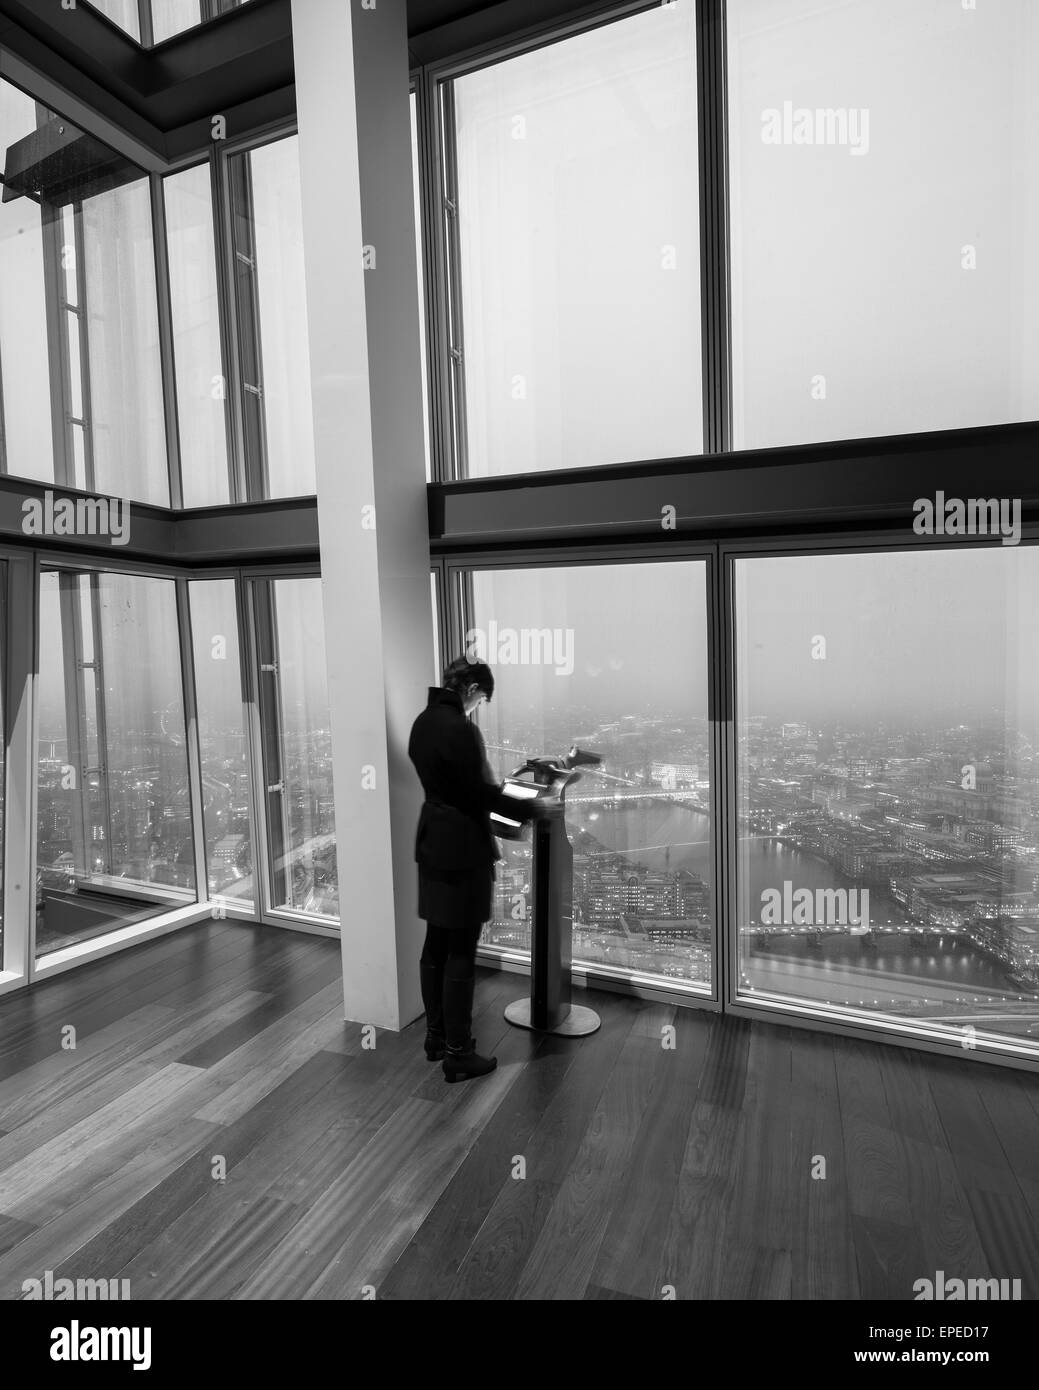 Person looking at the information screen. The Shard, London, United Kingdom. Architect: Renzo Piano Building Workshop, 2012. Stock Photo